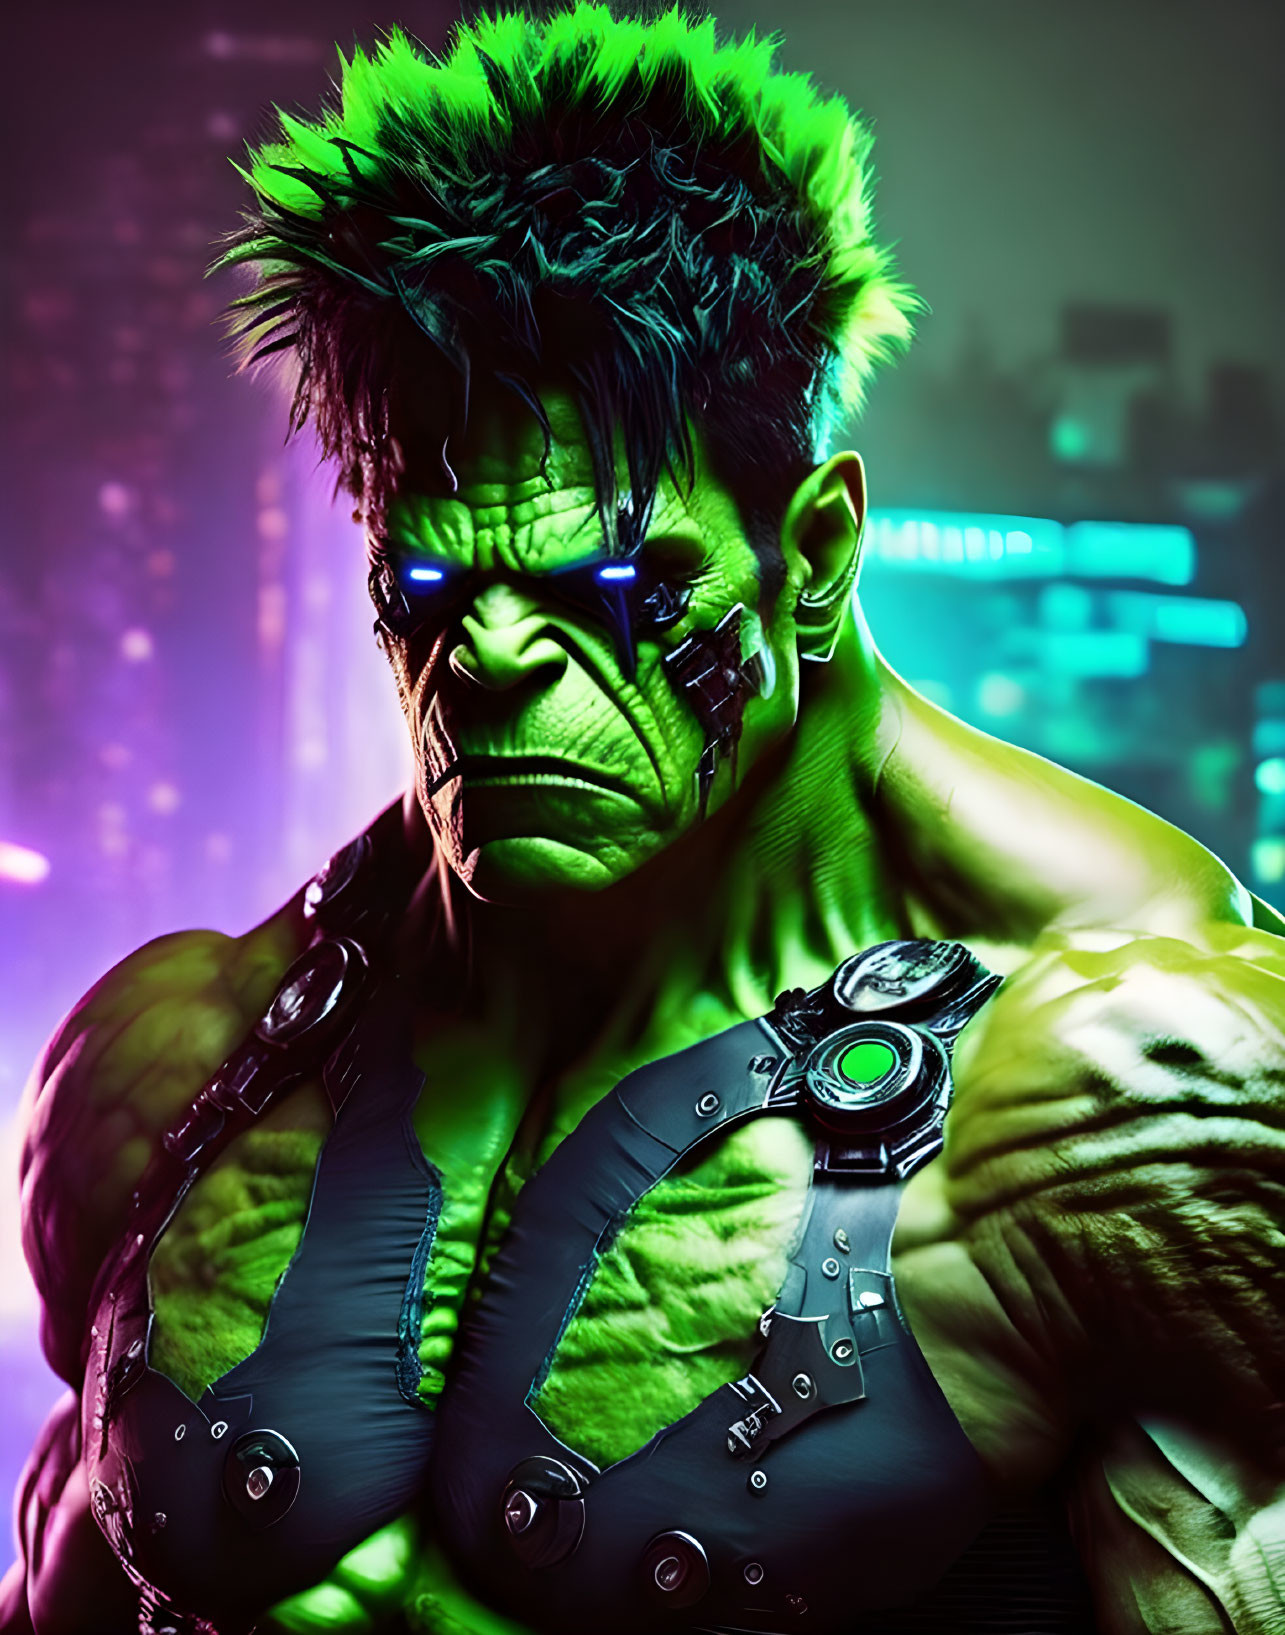 Muscular green-skinned cyberpunk character with spiky hair in futuristic attire on neon-lit